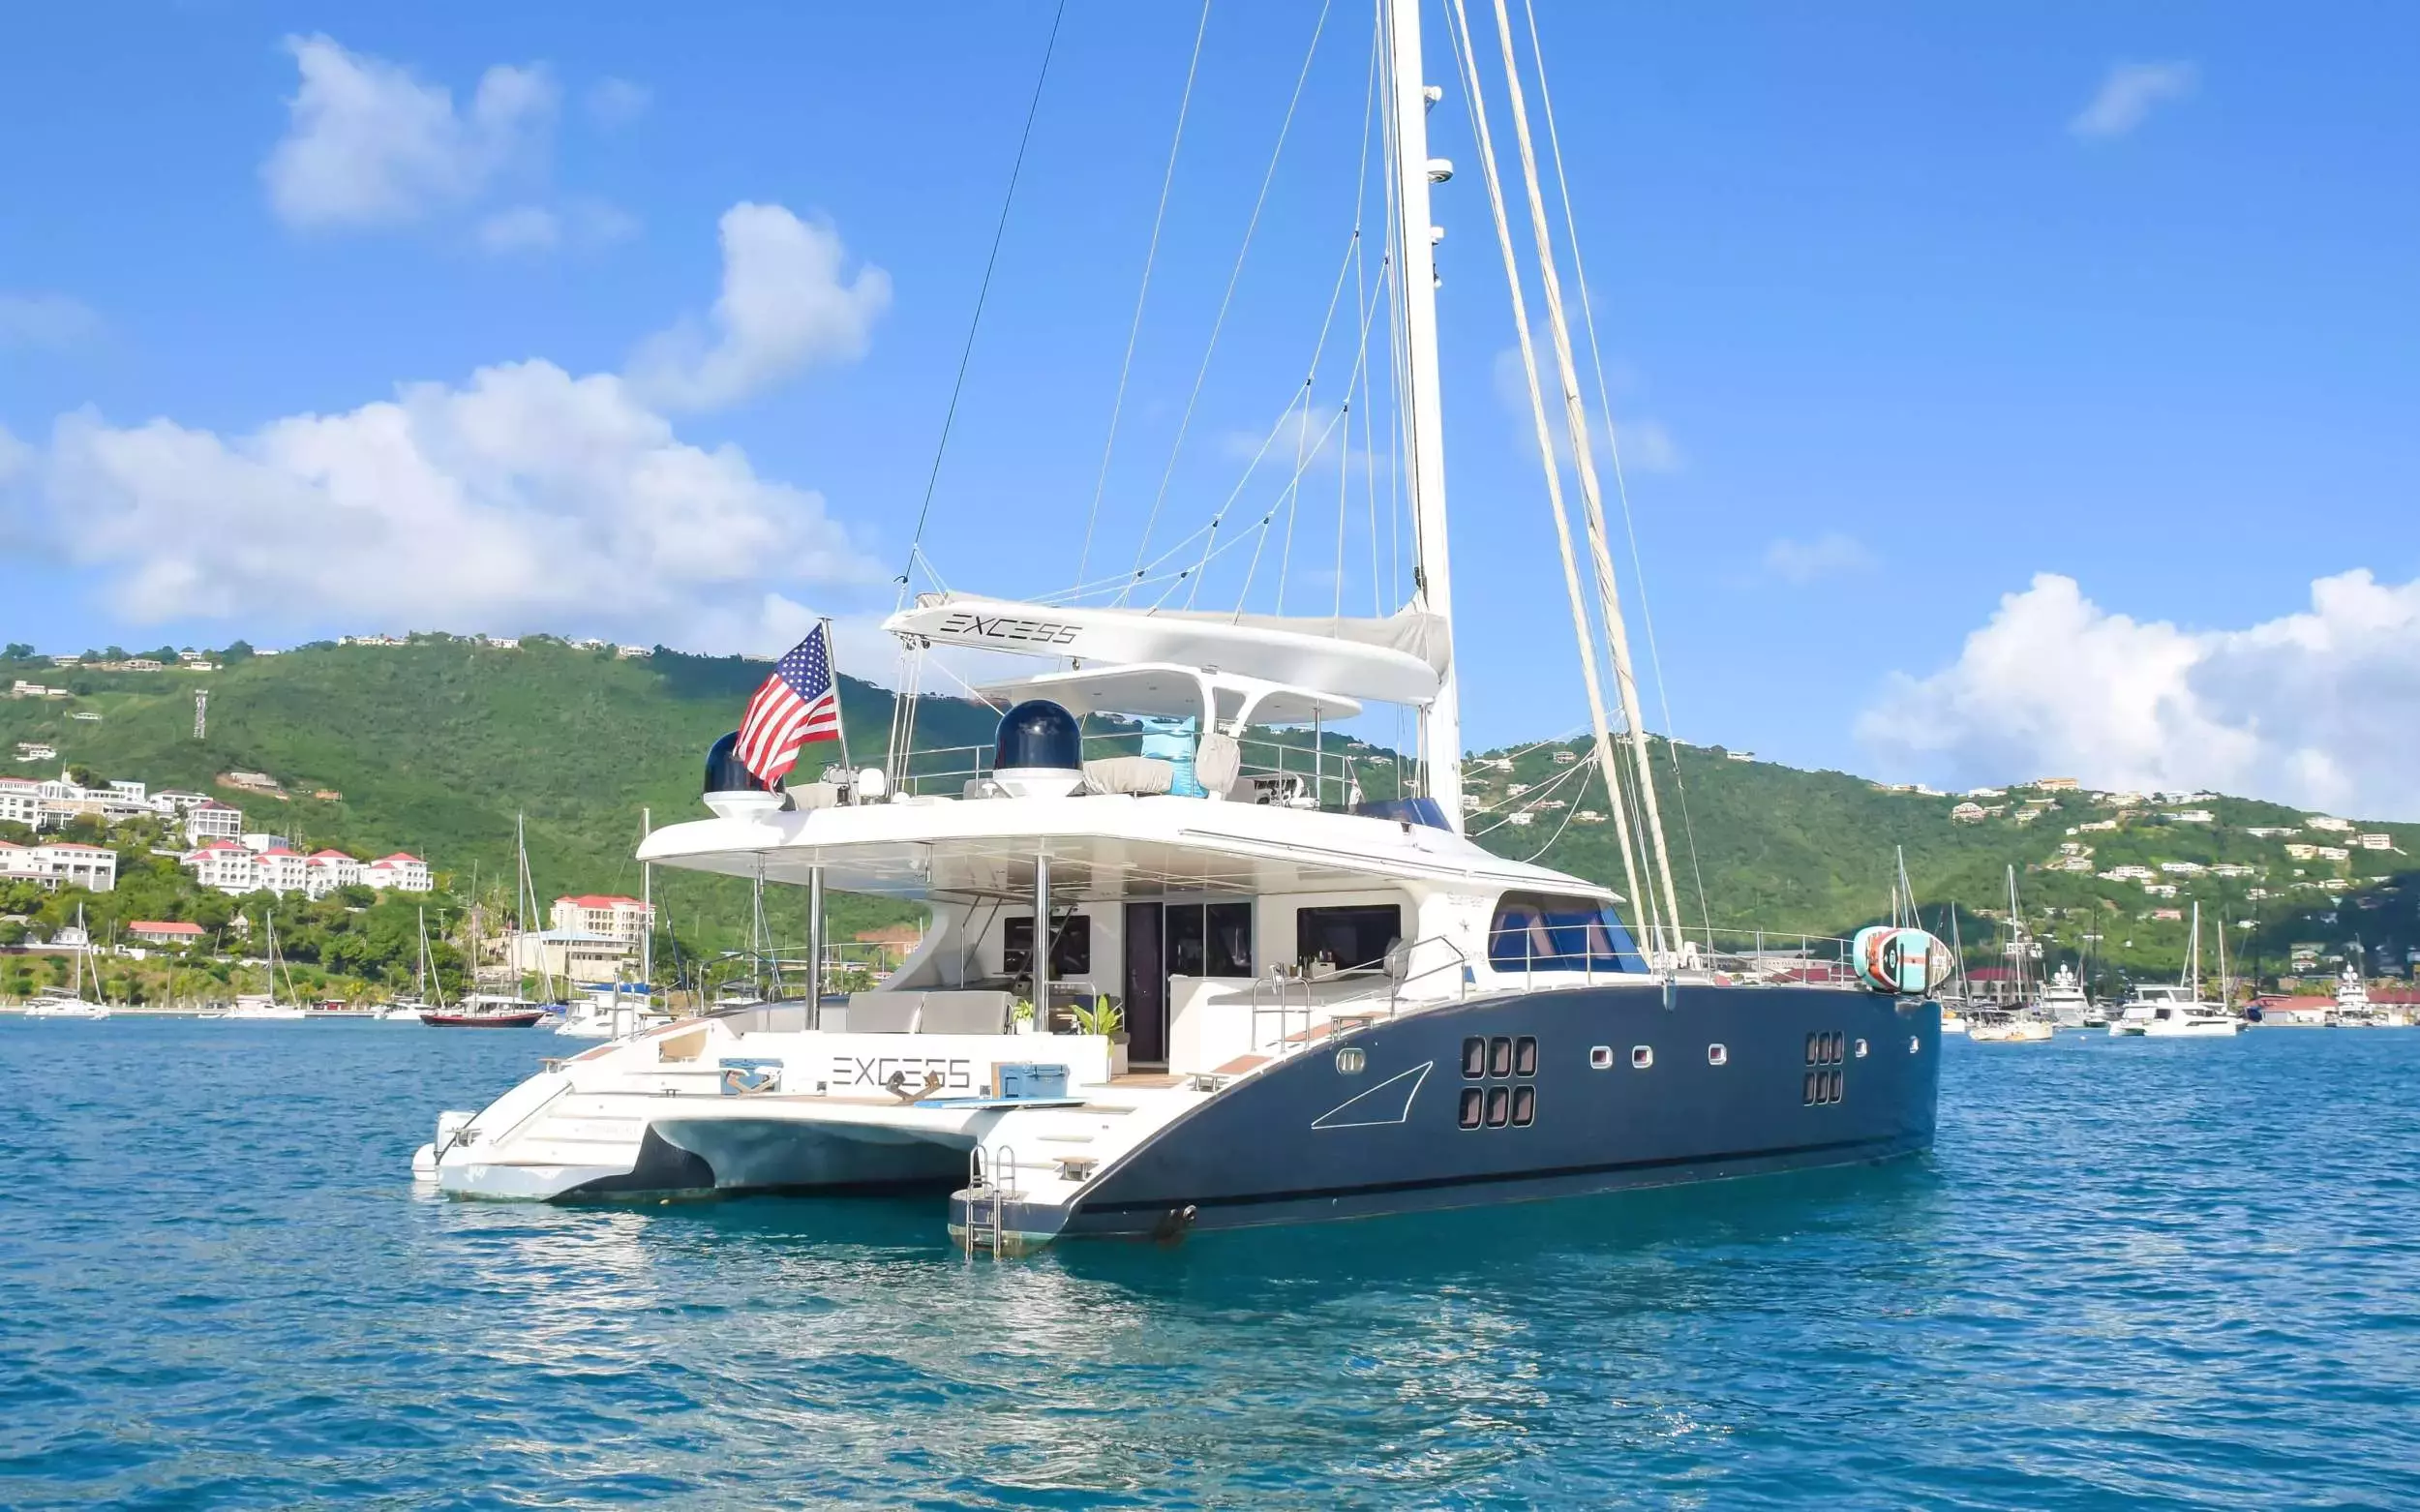 Excess by Sunreef Yachts - Special Offer for a private Luxury Catamaran Charter in Tortola with a crew